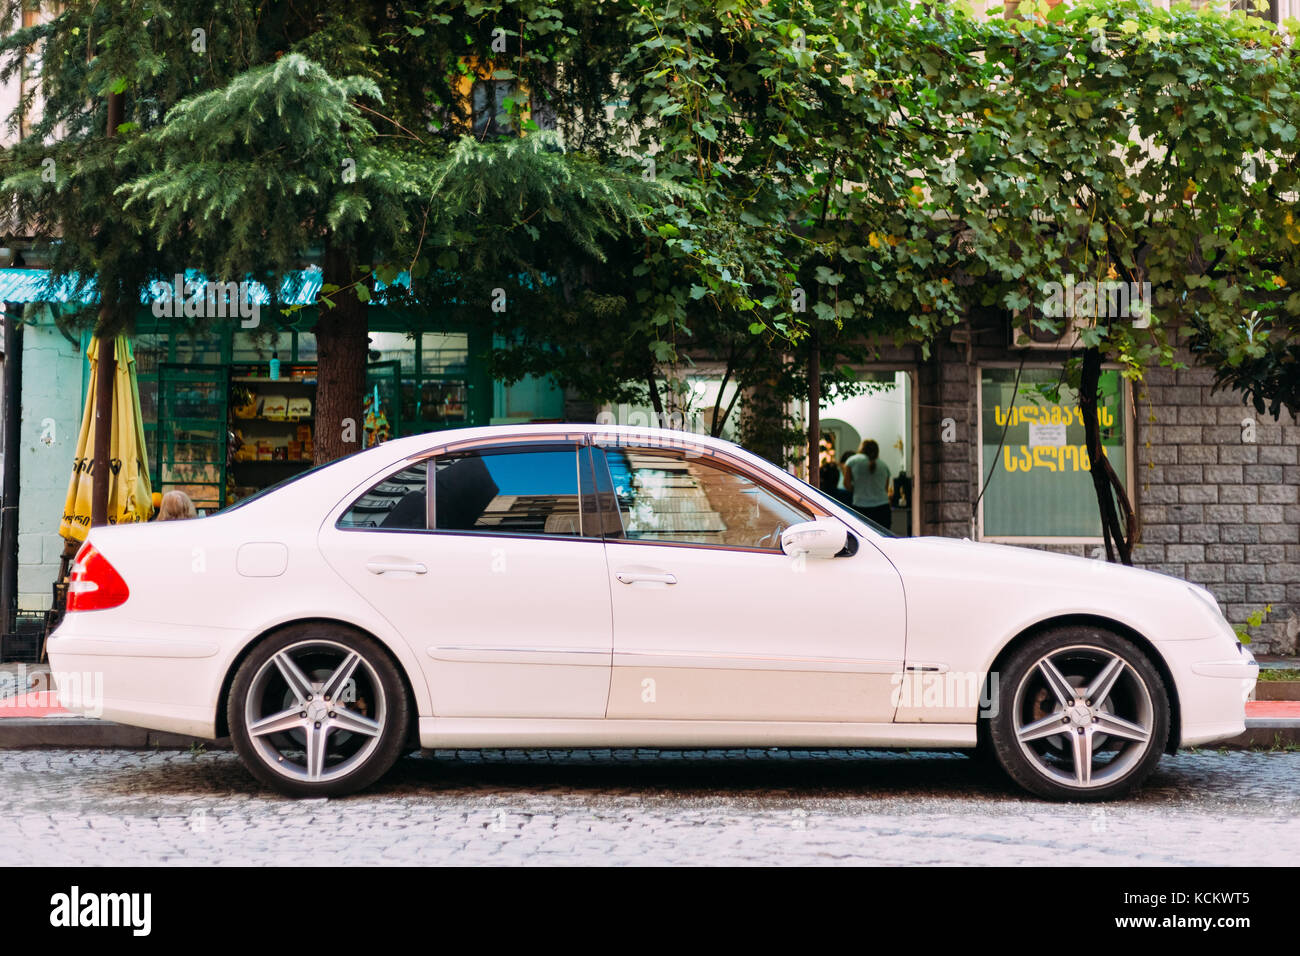 Batumi, Adjara, Georgia - September 7, 2017: Car brand Mercedes-Benz E 320 is parked on a narrow street in the old part of city Stock Photo